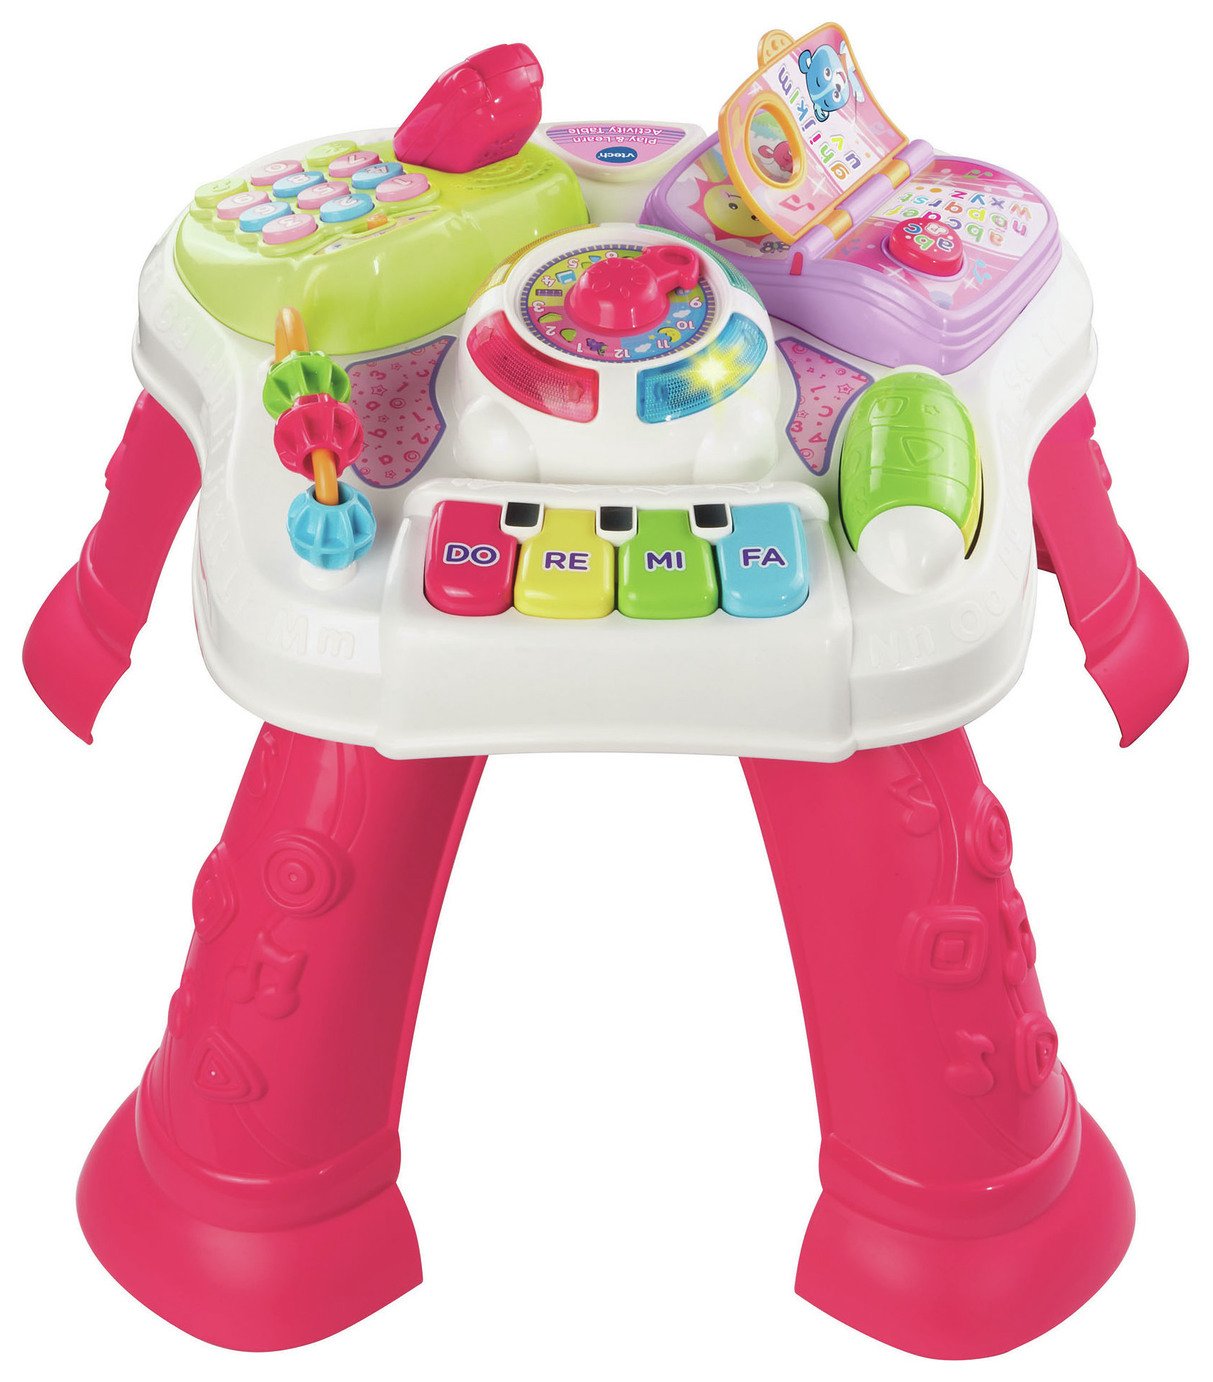 VTech Play and Learn Activity Table